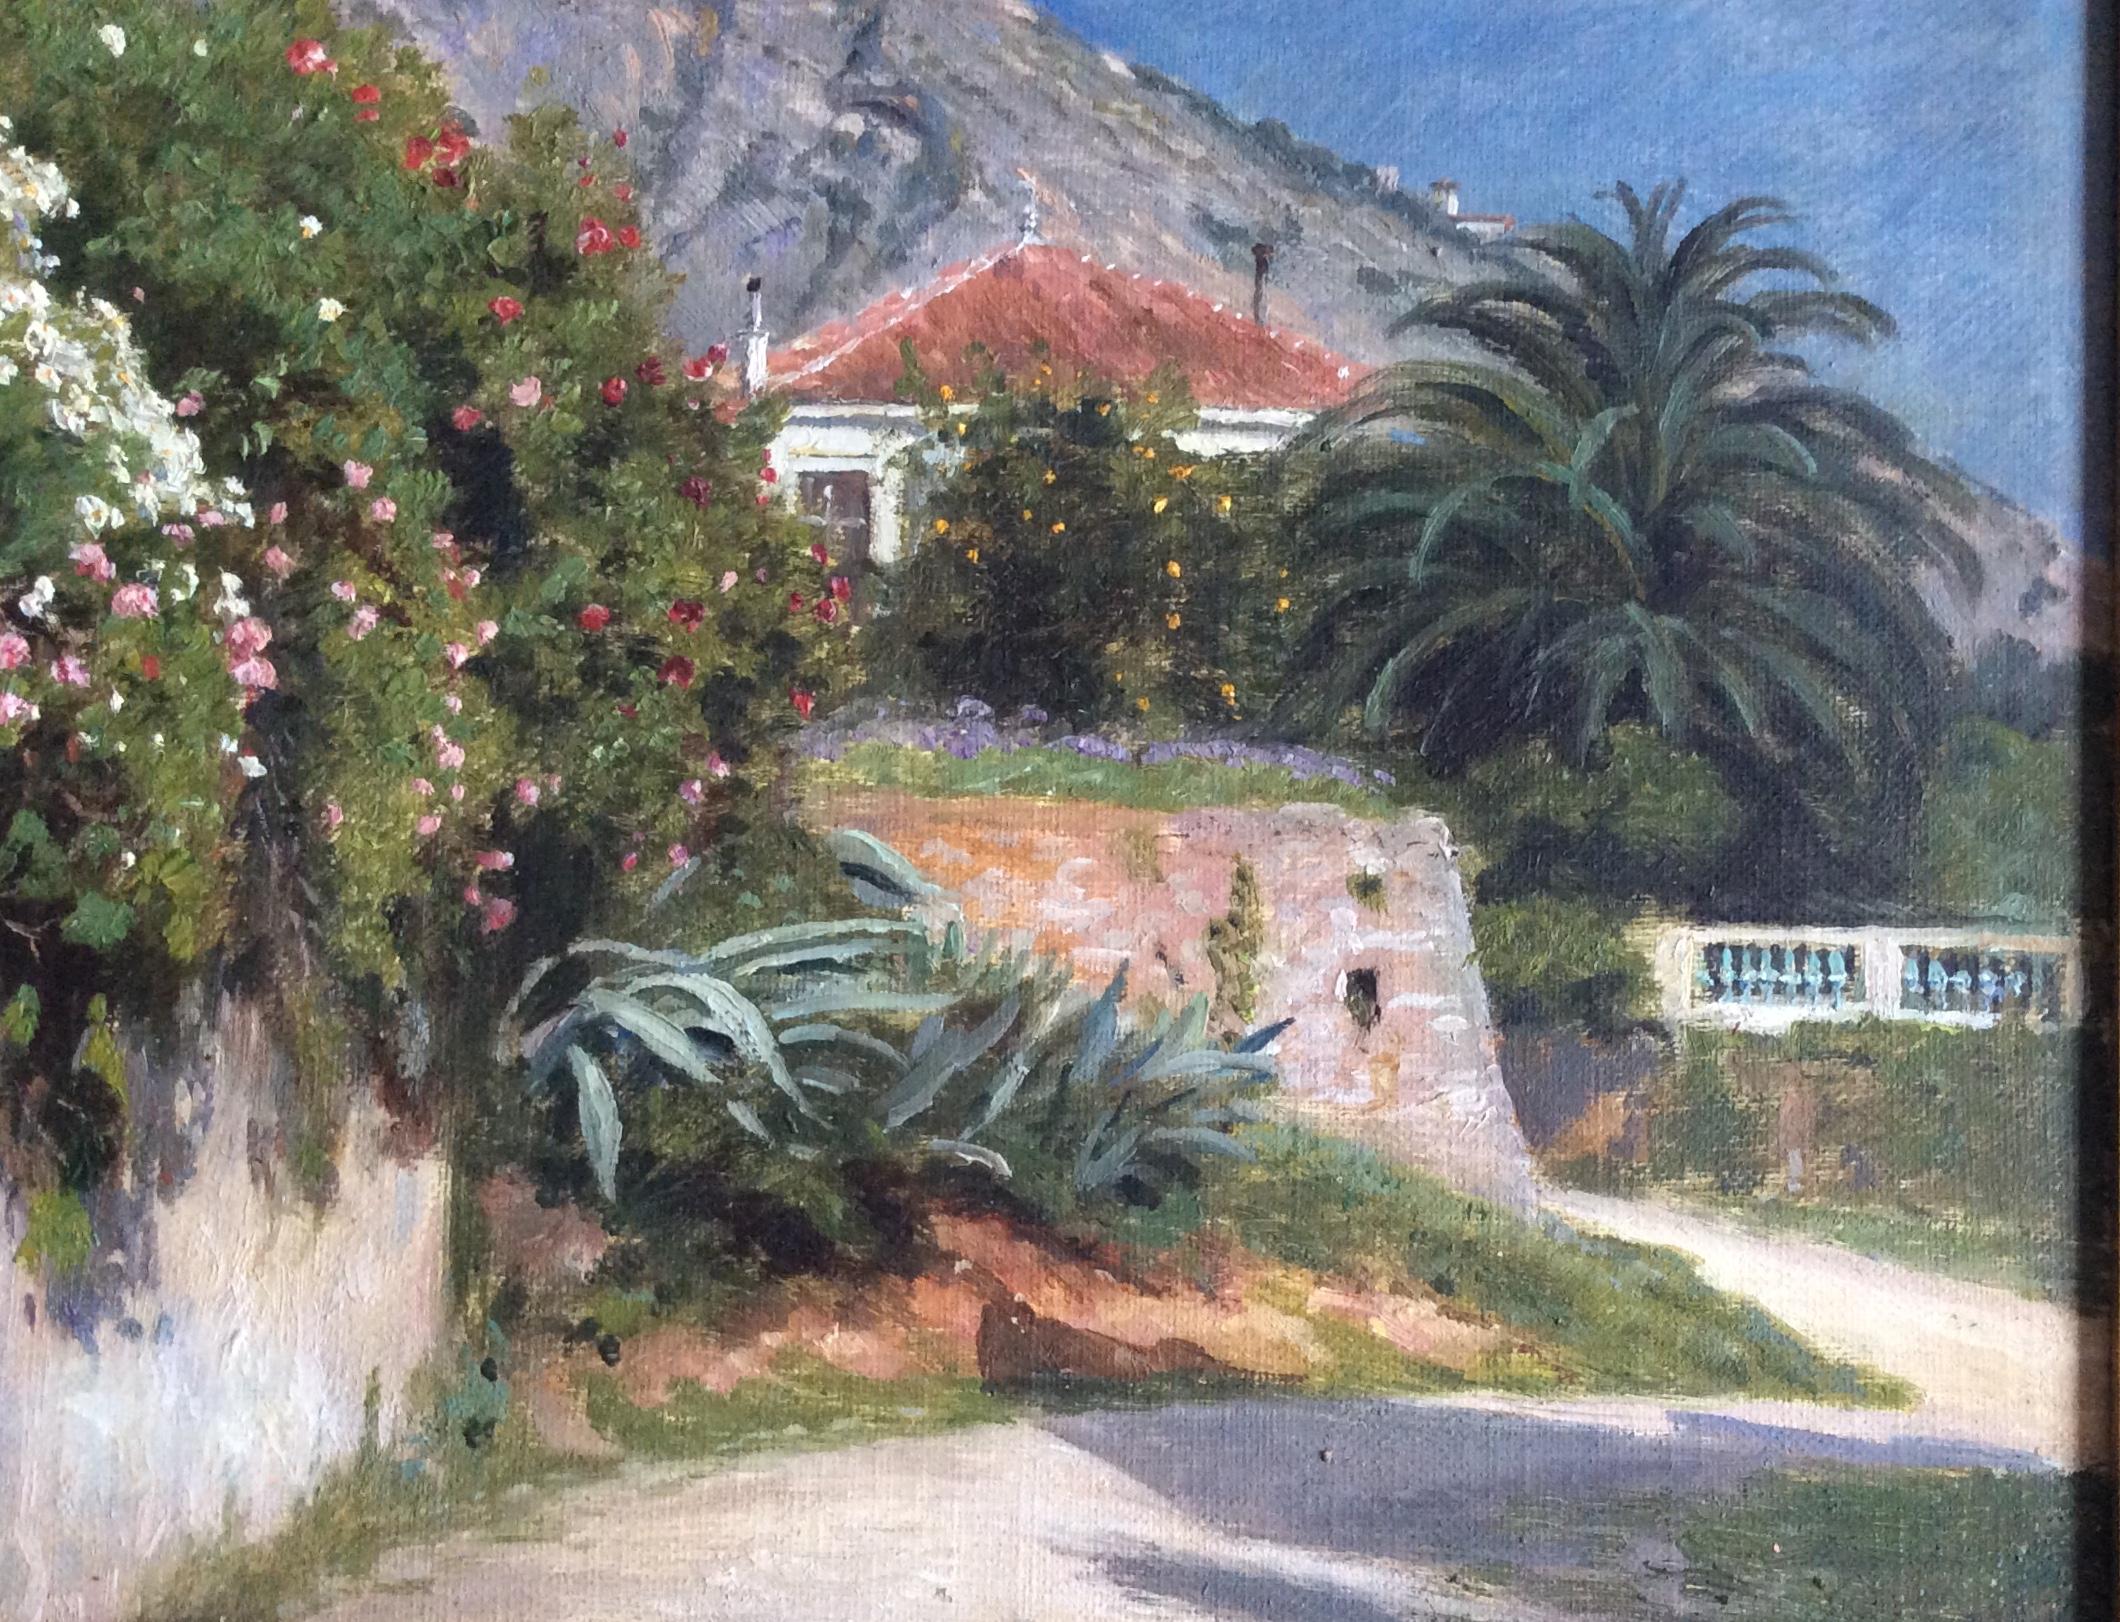 Other Christian Zacho painting from around Menton, France For Sale